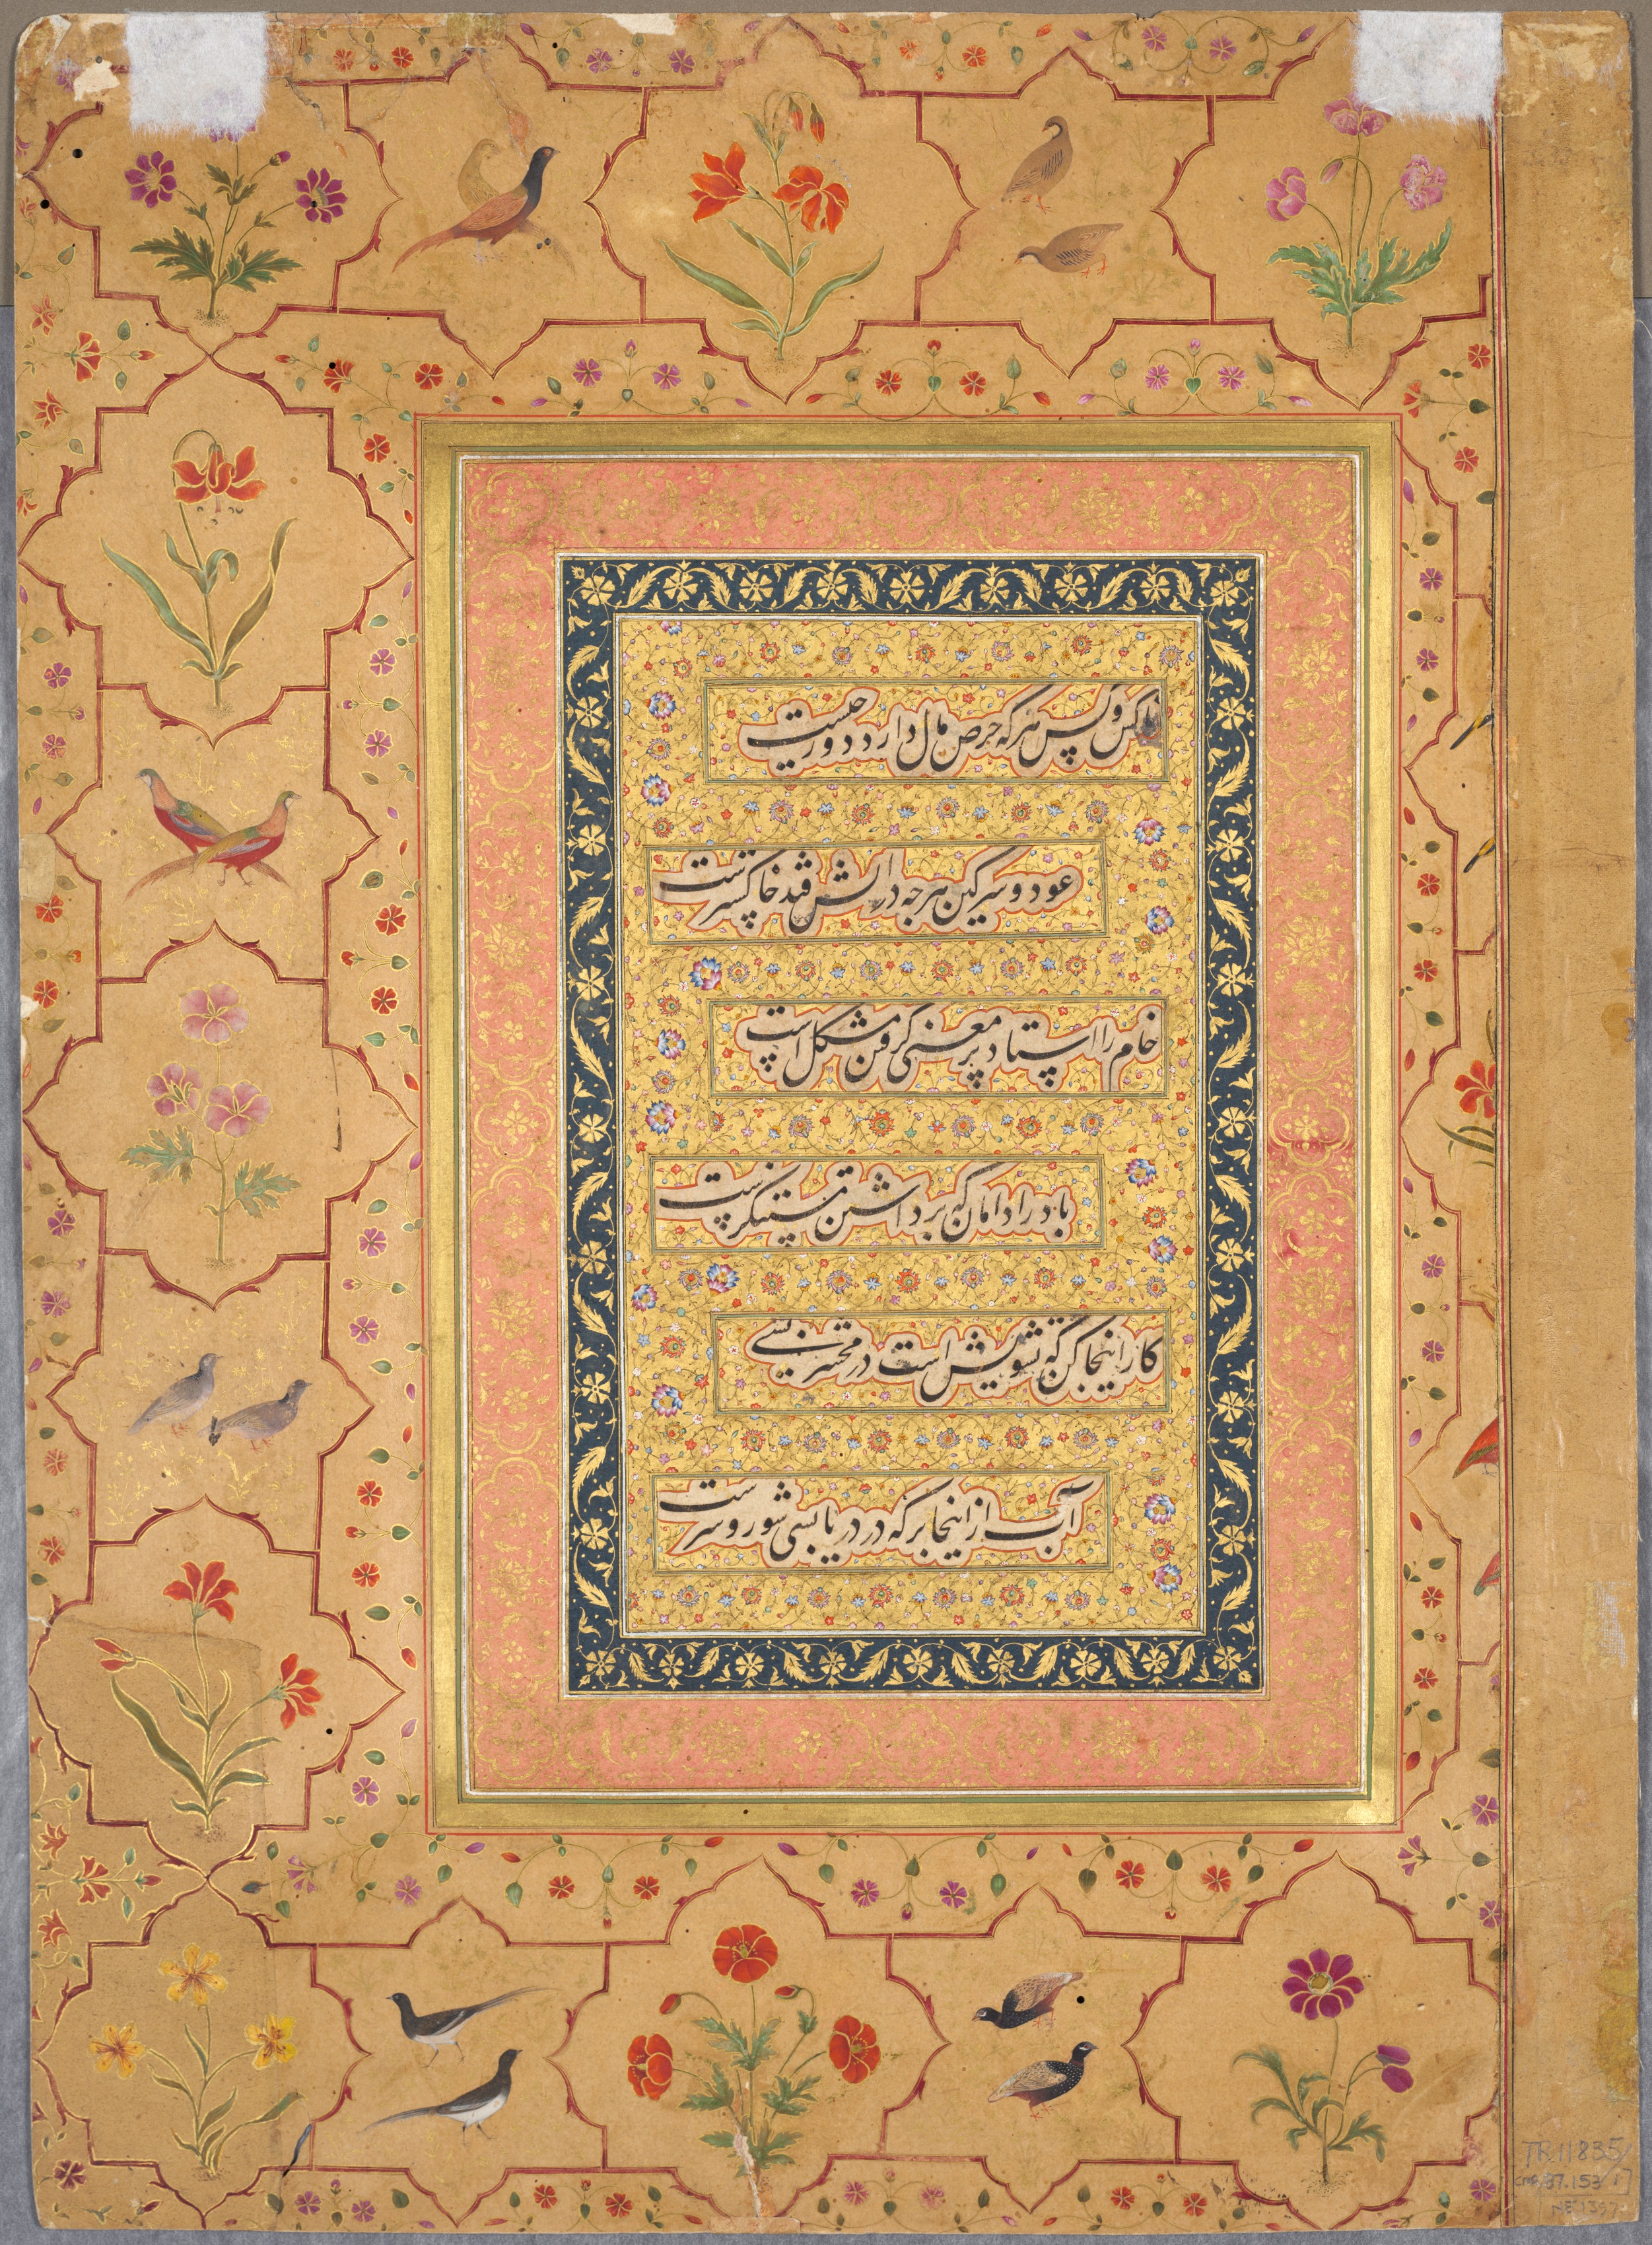 Page from the Late Shah Jahan Album: Calligraphy Framed by an Ornamental Border with Poppies and Pairs of Birds (verso)